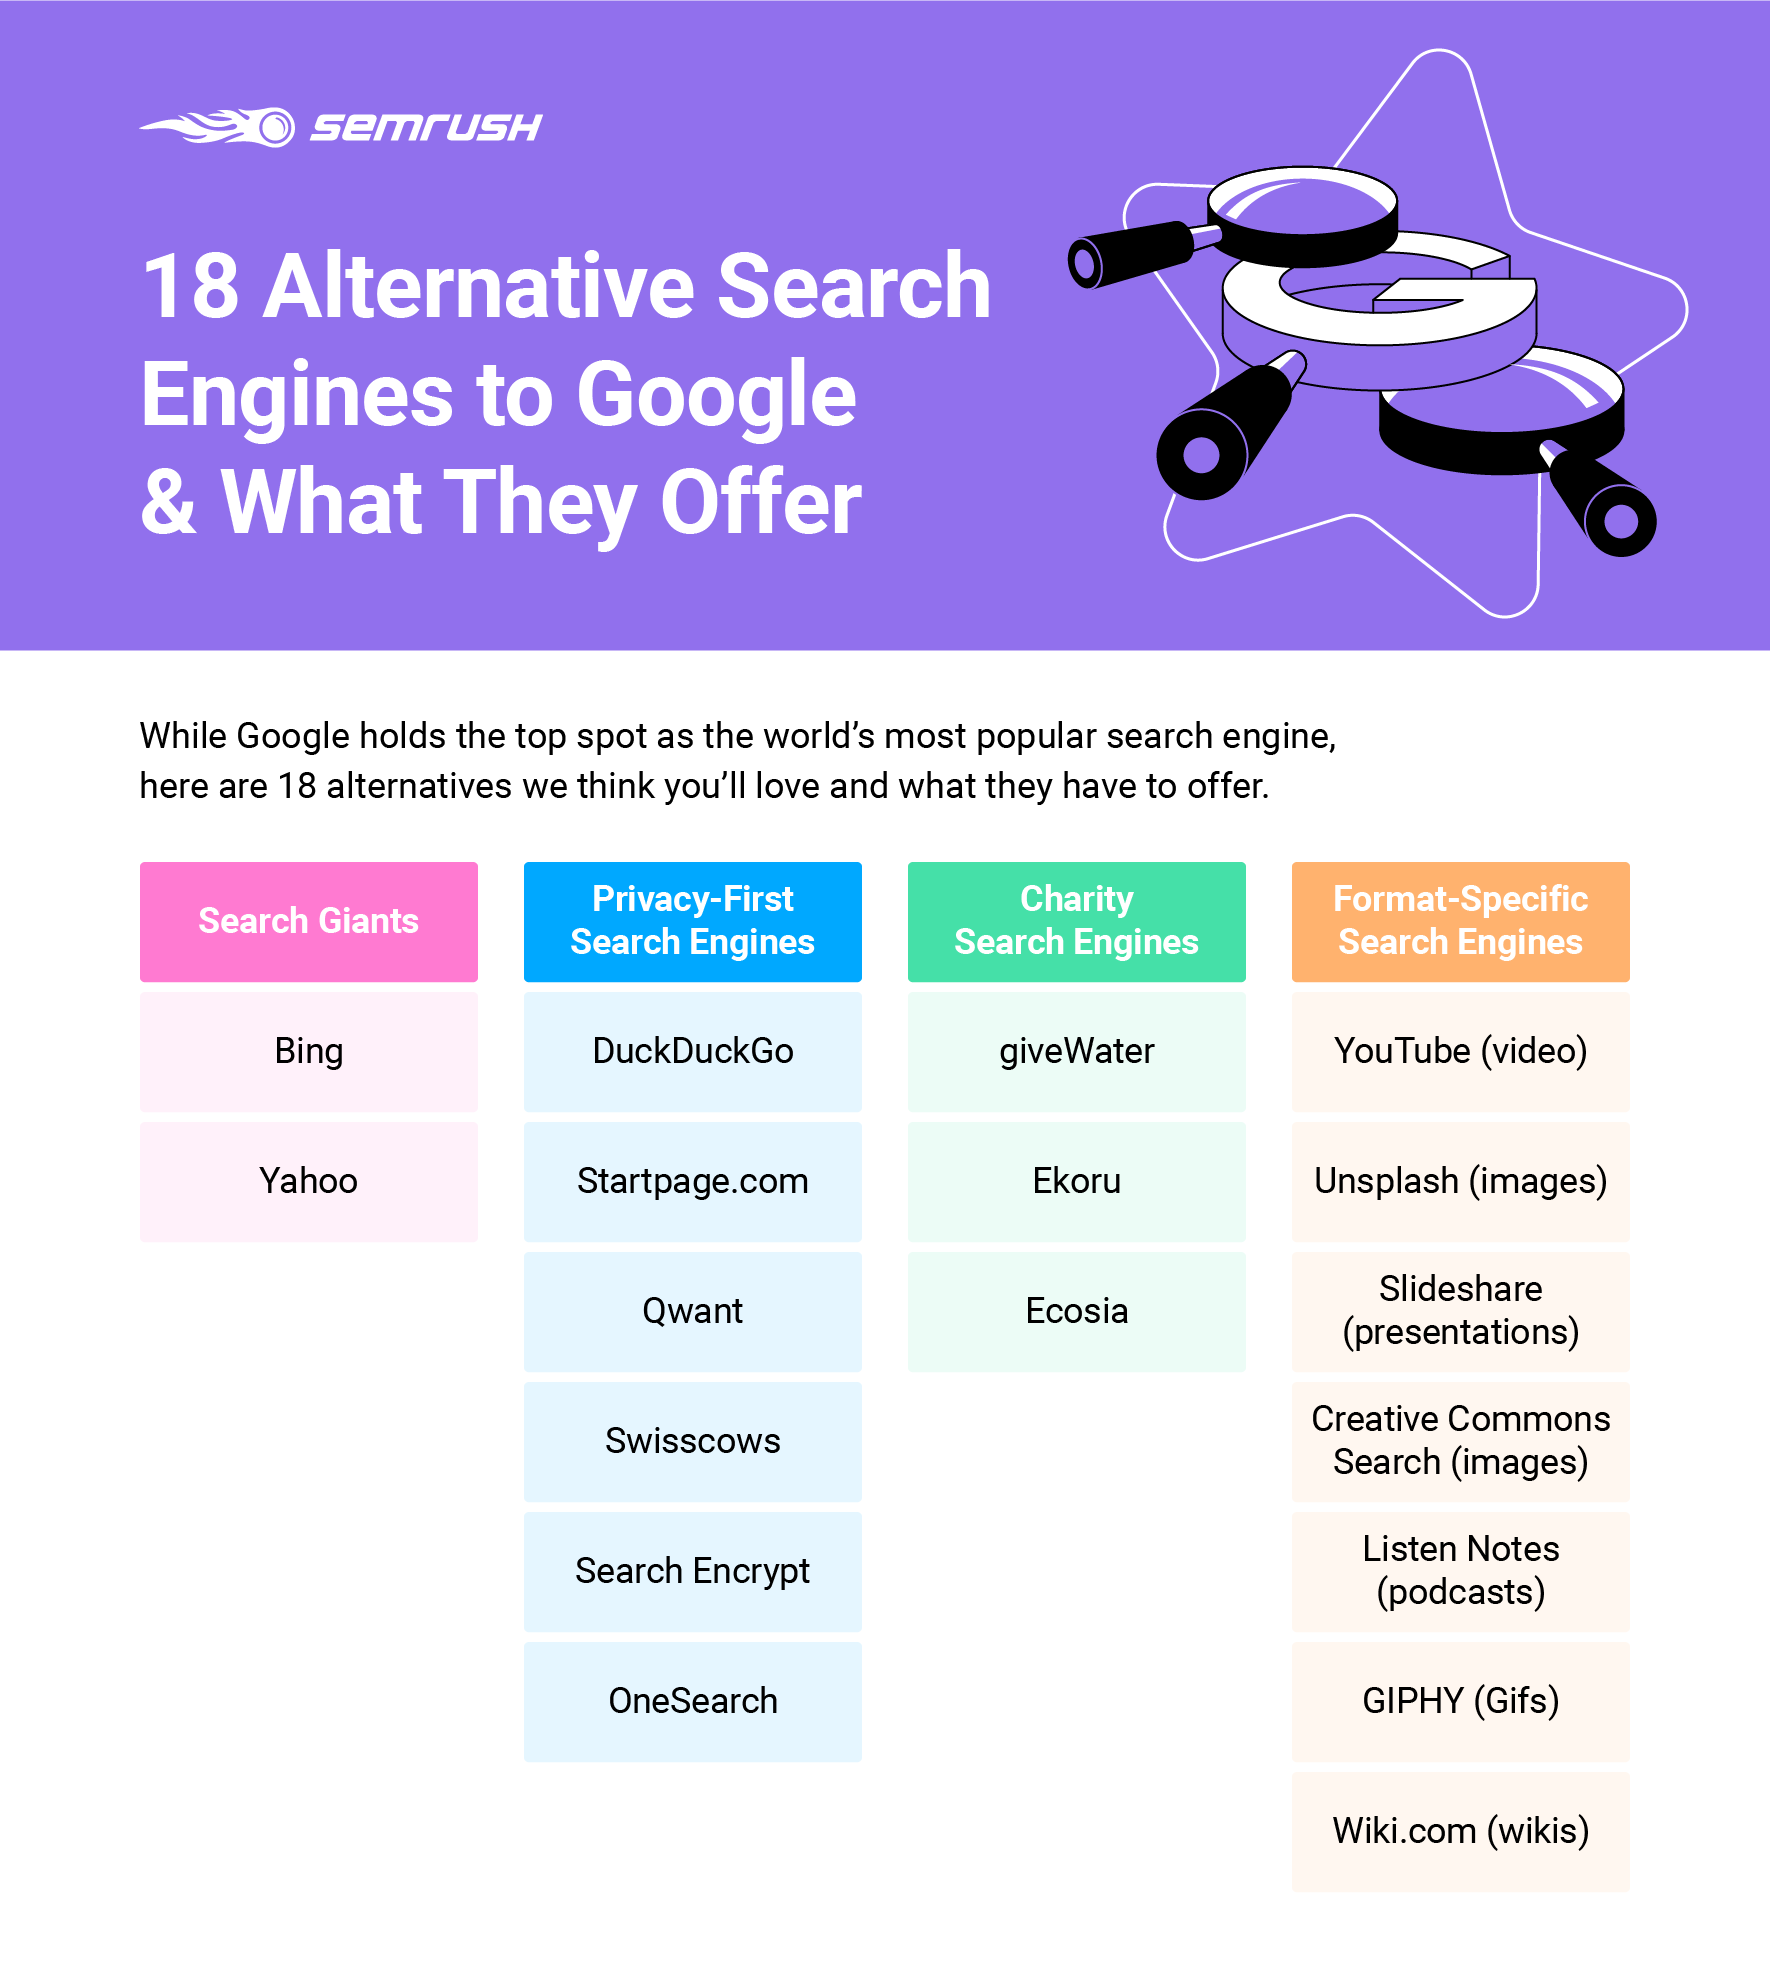 What makes Google unique from other search engines?